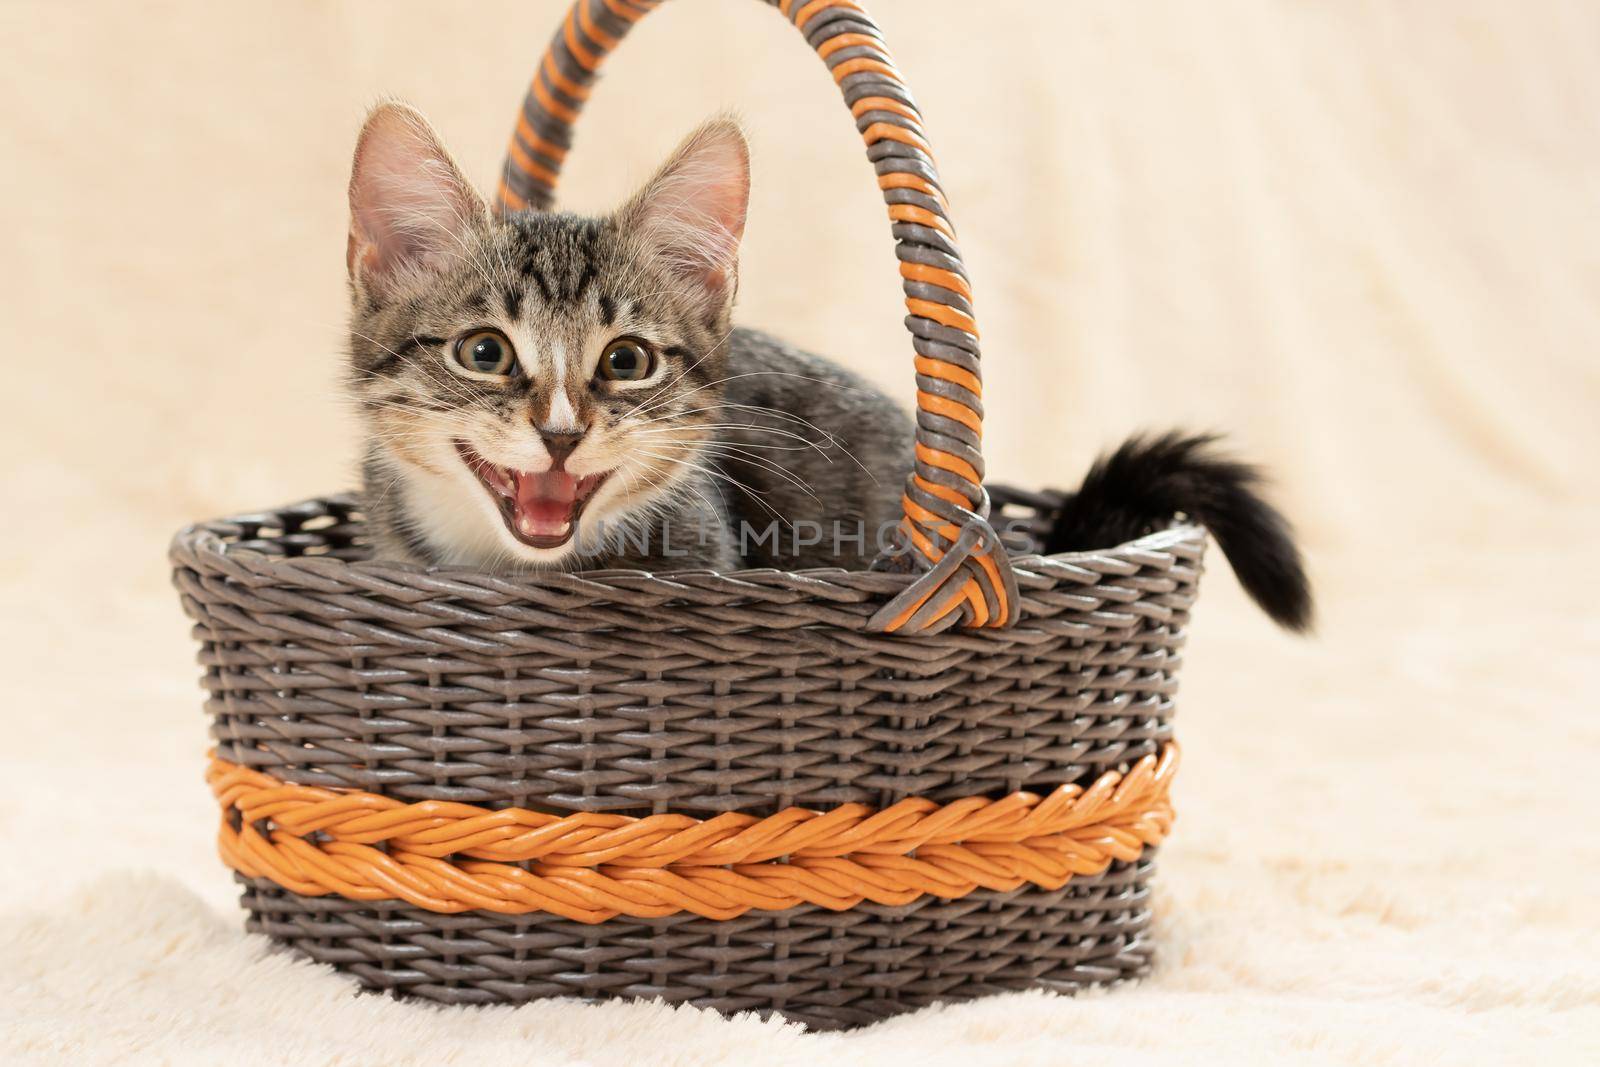 Cute gray kitten meows while sitting in a wicker basket on a background of a cream fur plaid.